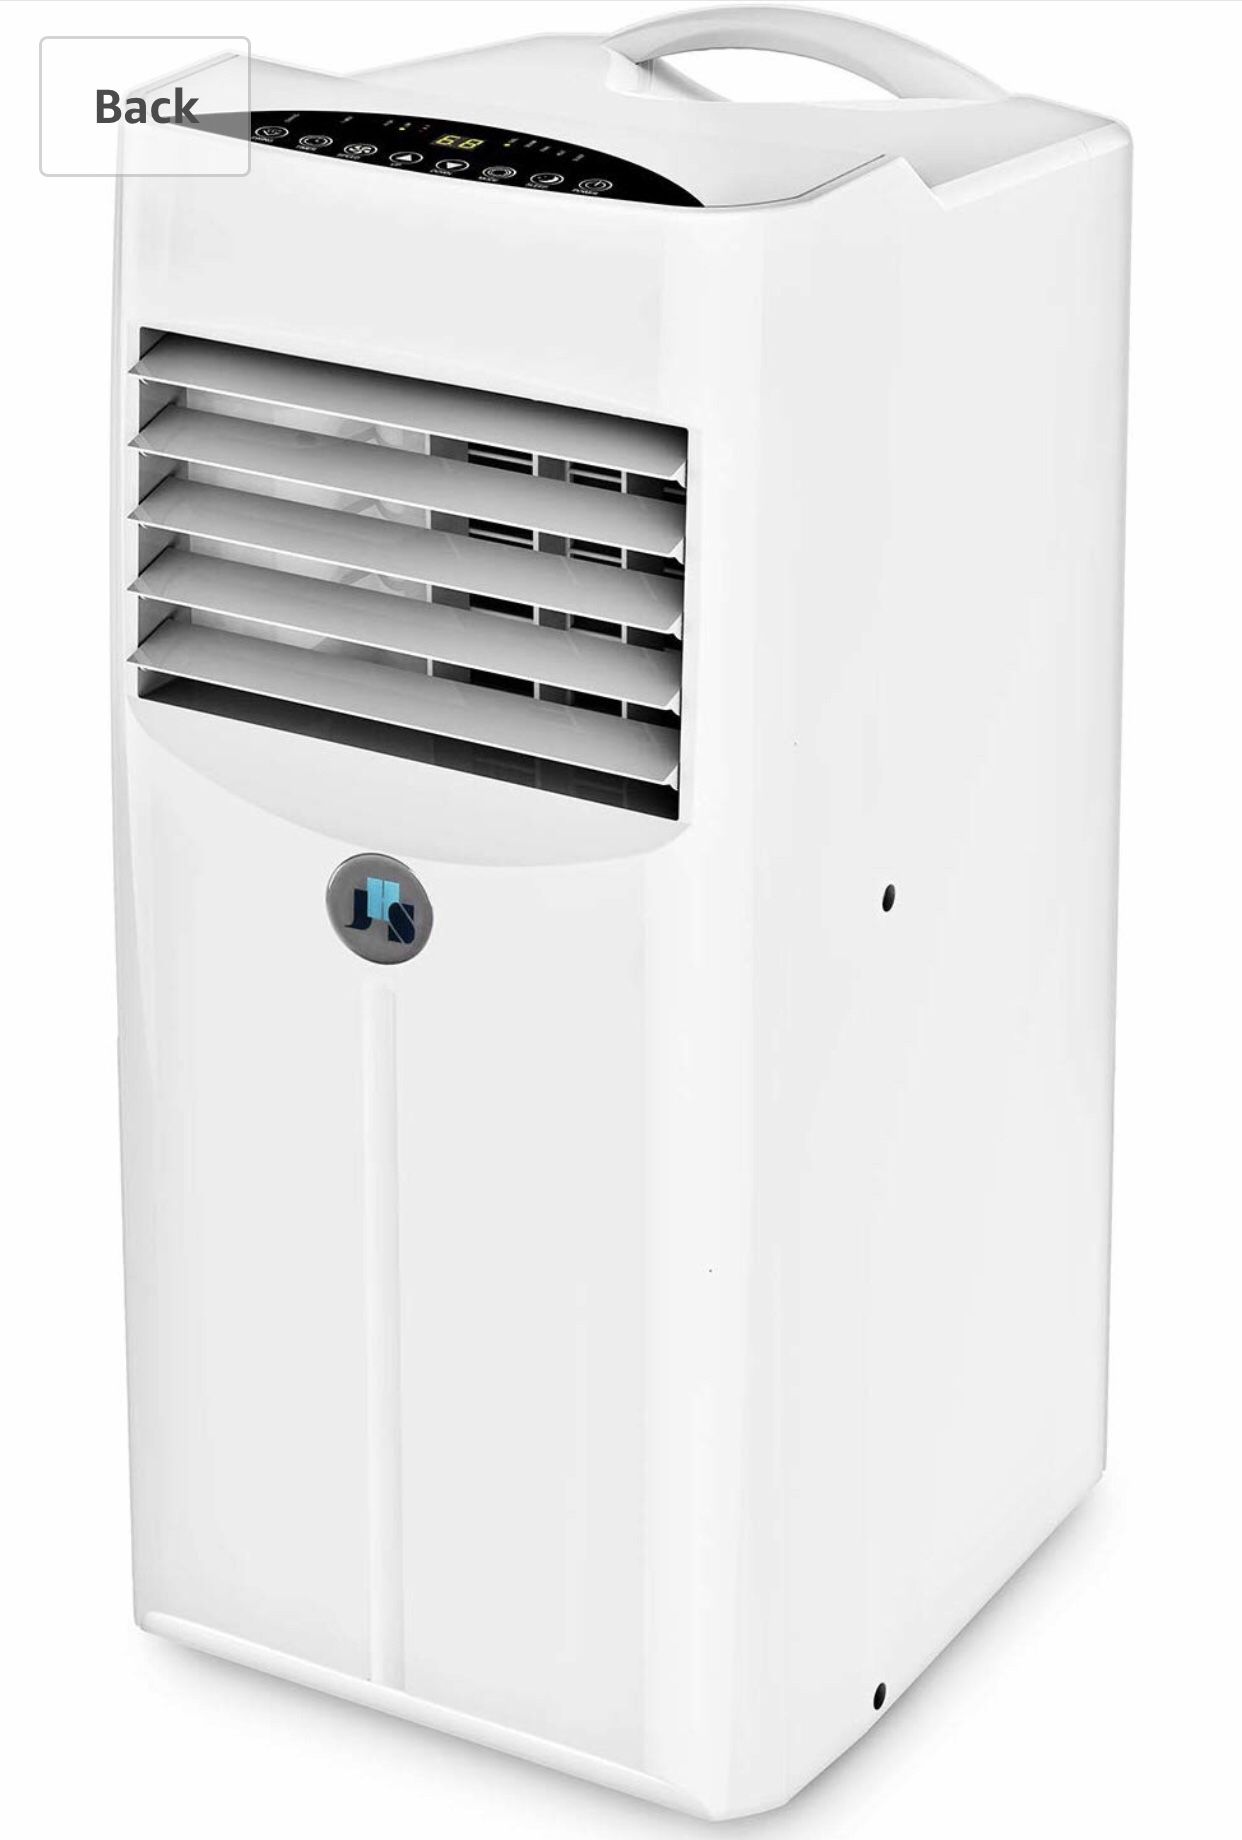 JHS 10,000 BTU Portable AC Unit for Rooms, Air Conditioner Portable with Dehumidifier and Fan, Remote Control, Digital LED Display, 220 Sq.Ft